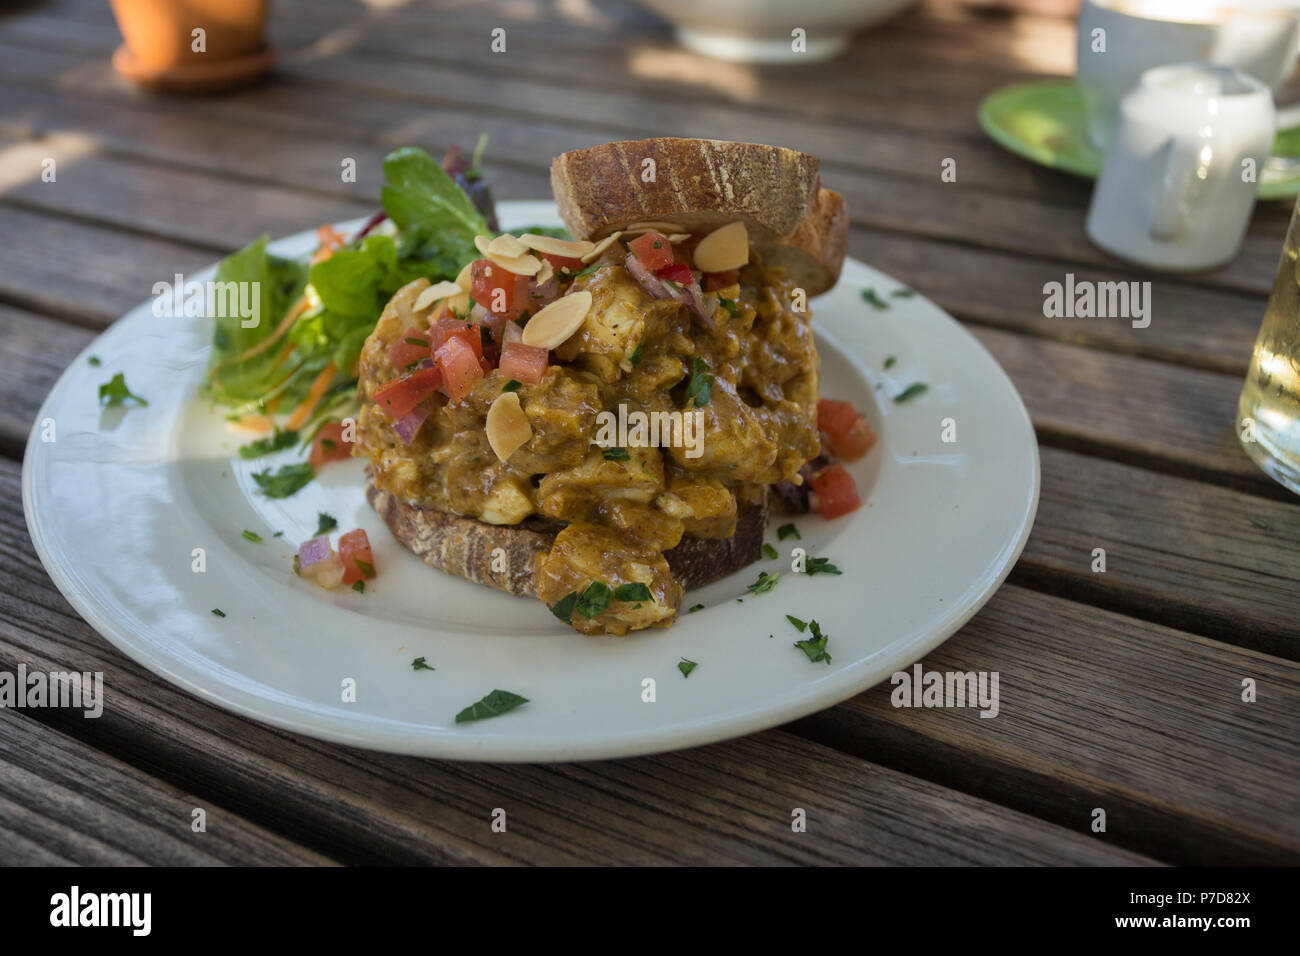 open sandwich filled with grilled chicken in spicy harissa and date dressing on white plate with salad placed on top of wooden slatted table Stock Photo